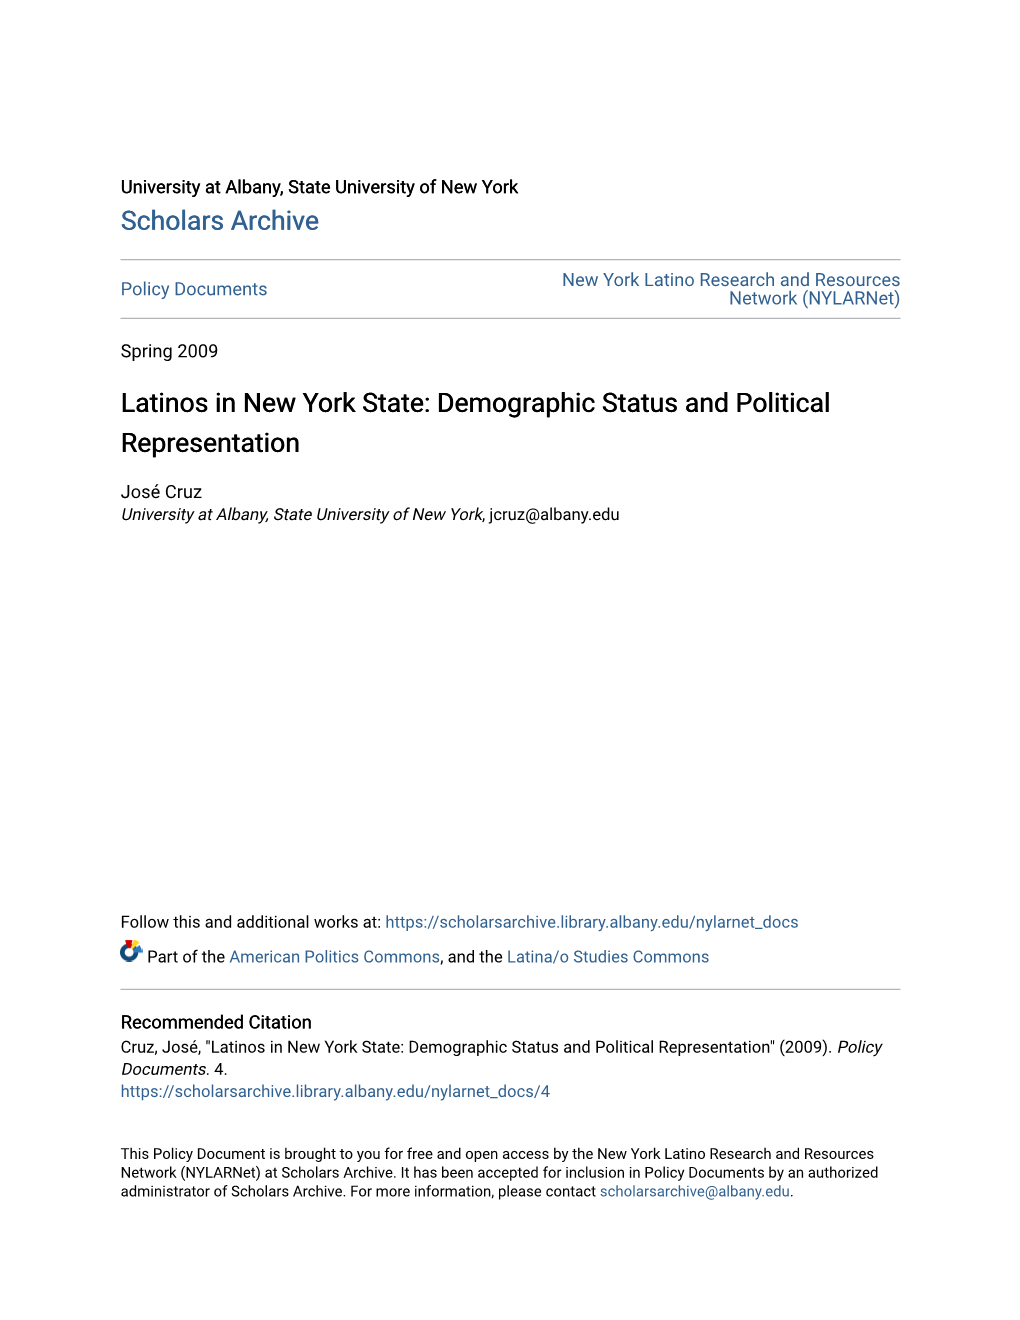 Latinos in New York State: Demographic Status and Political Representation